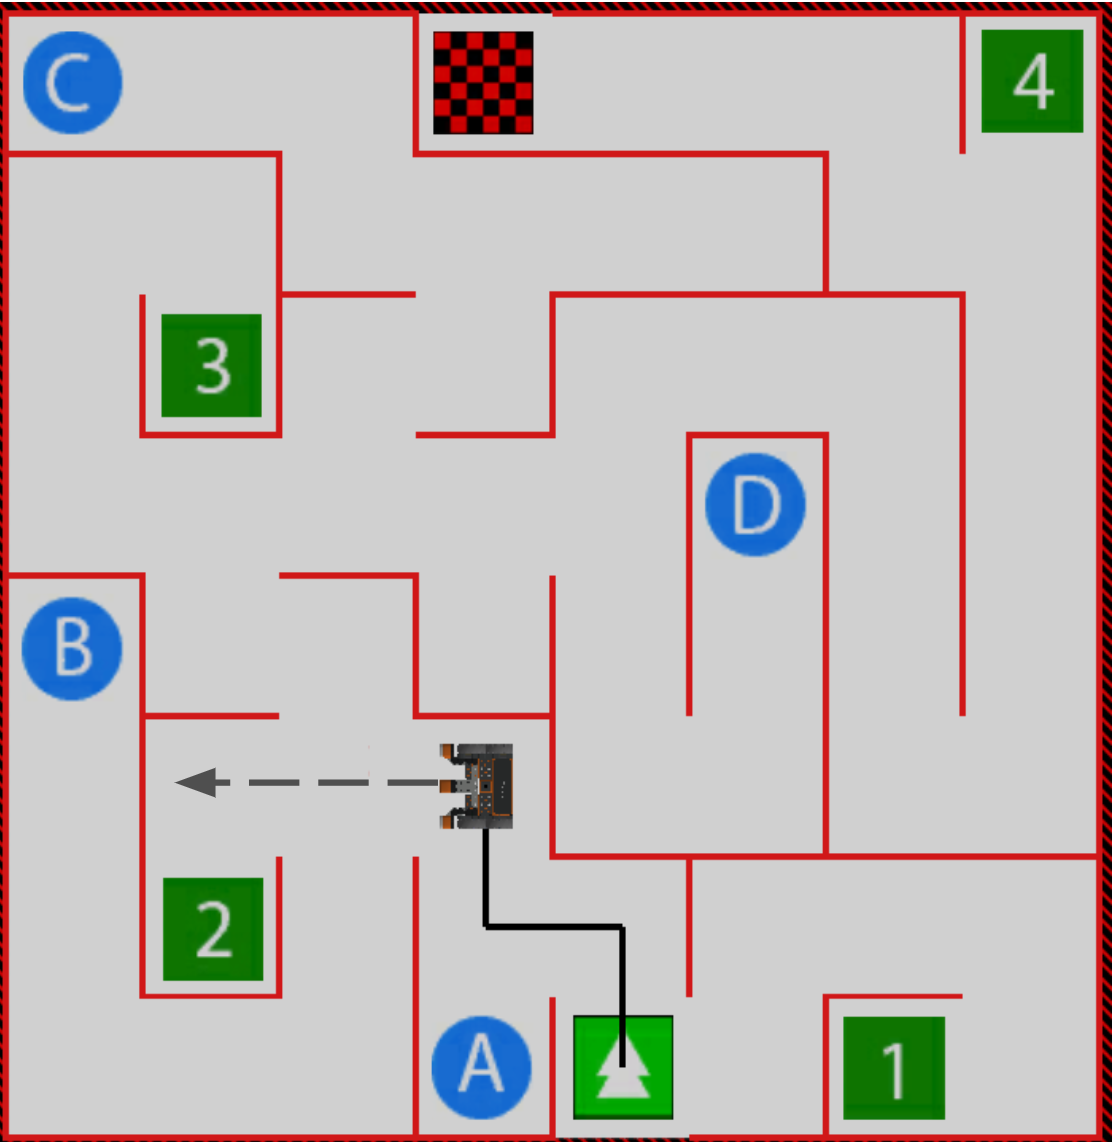 image of the path of the robot if it were to continue straight to the next wall